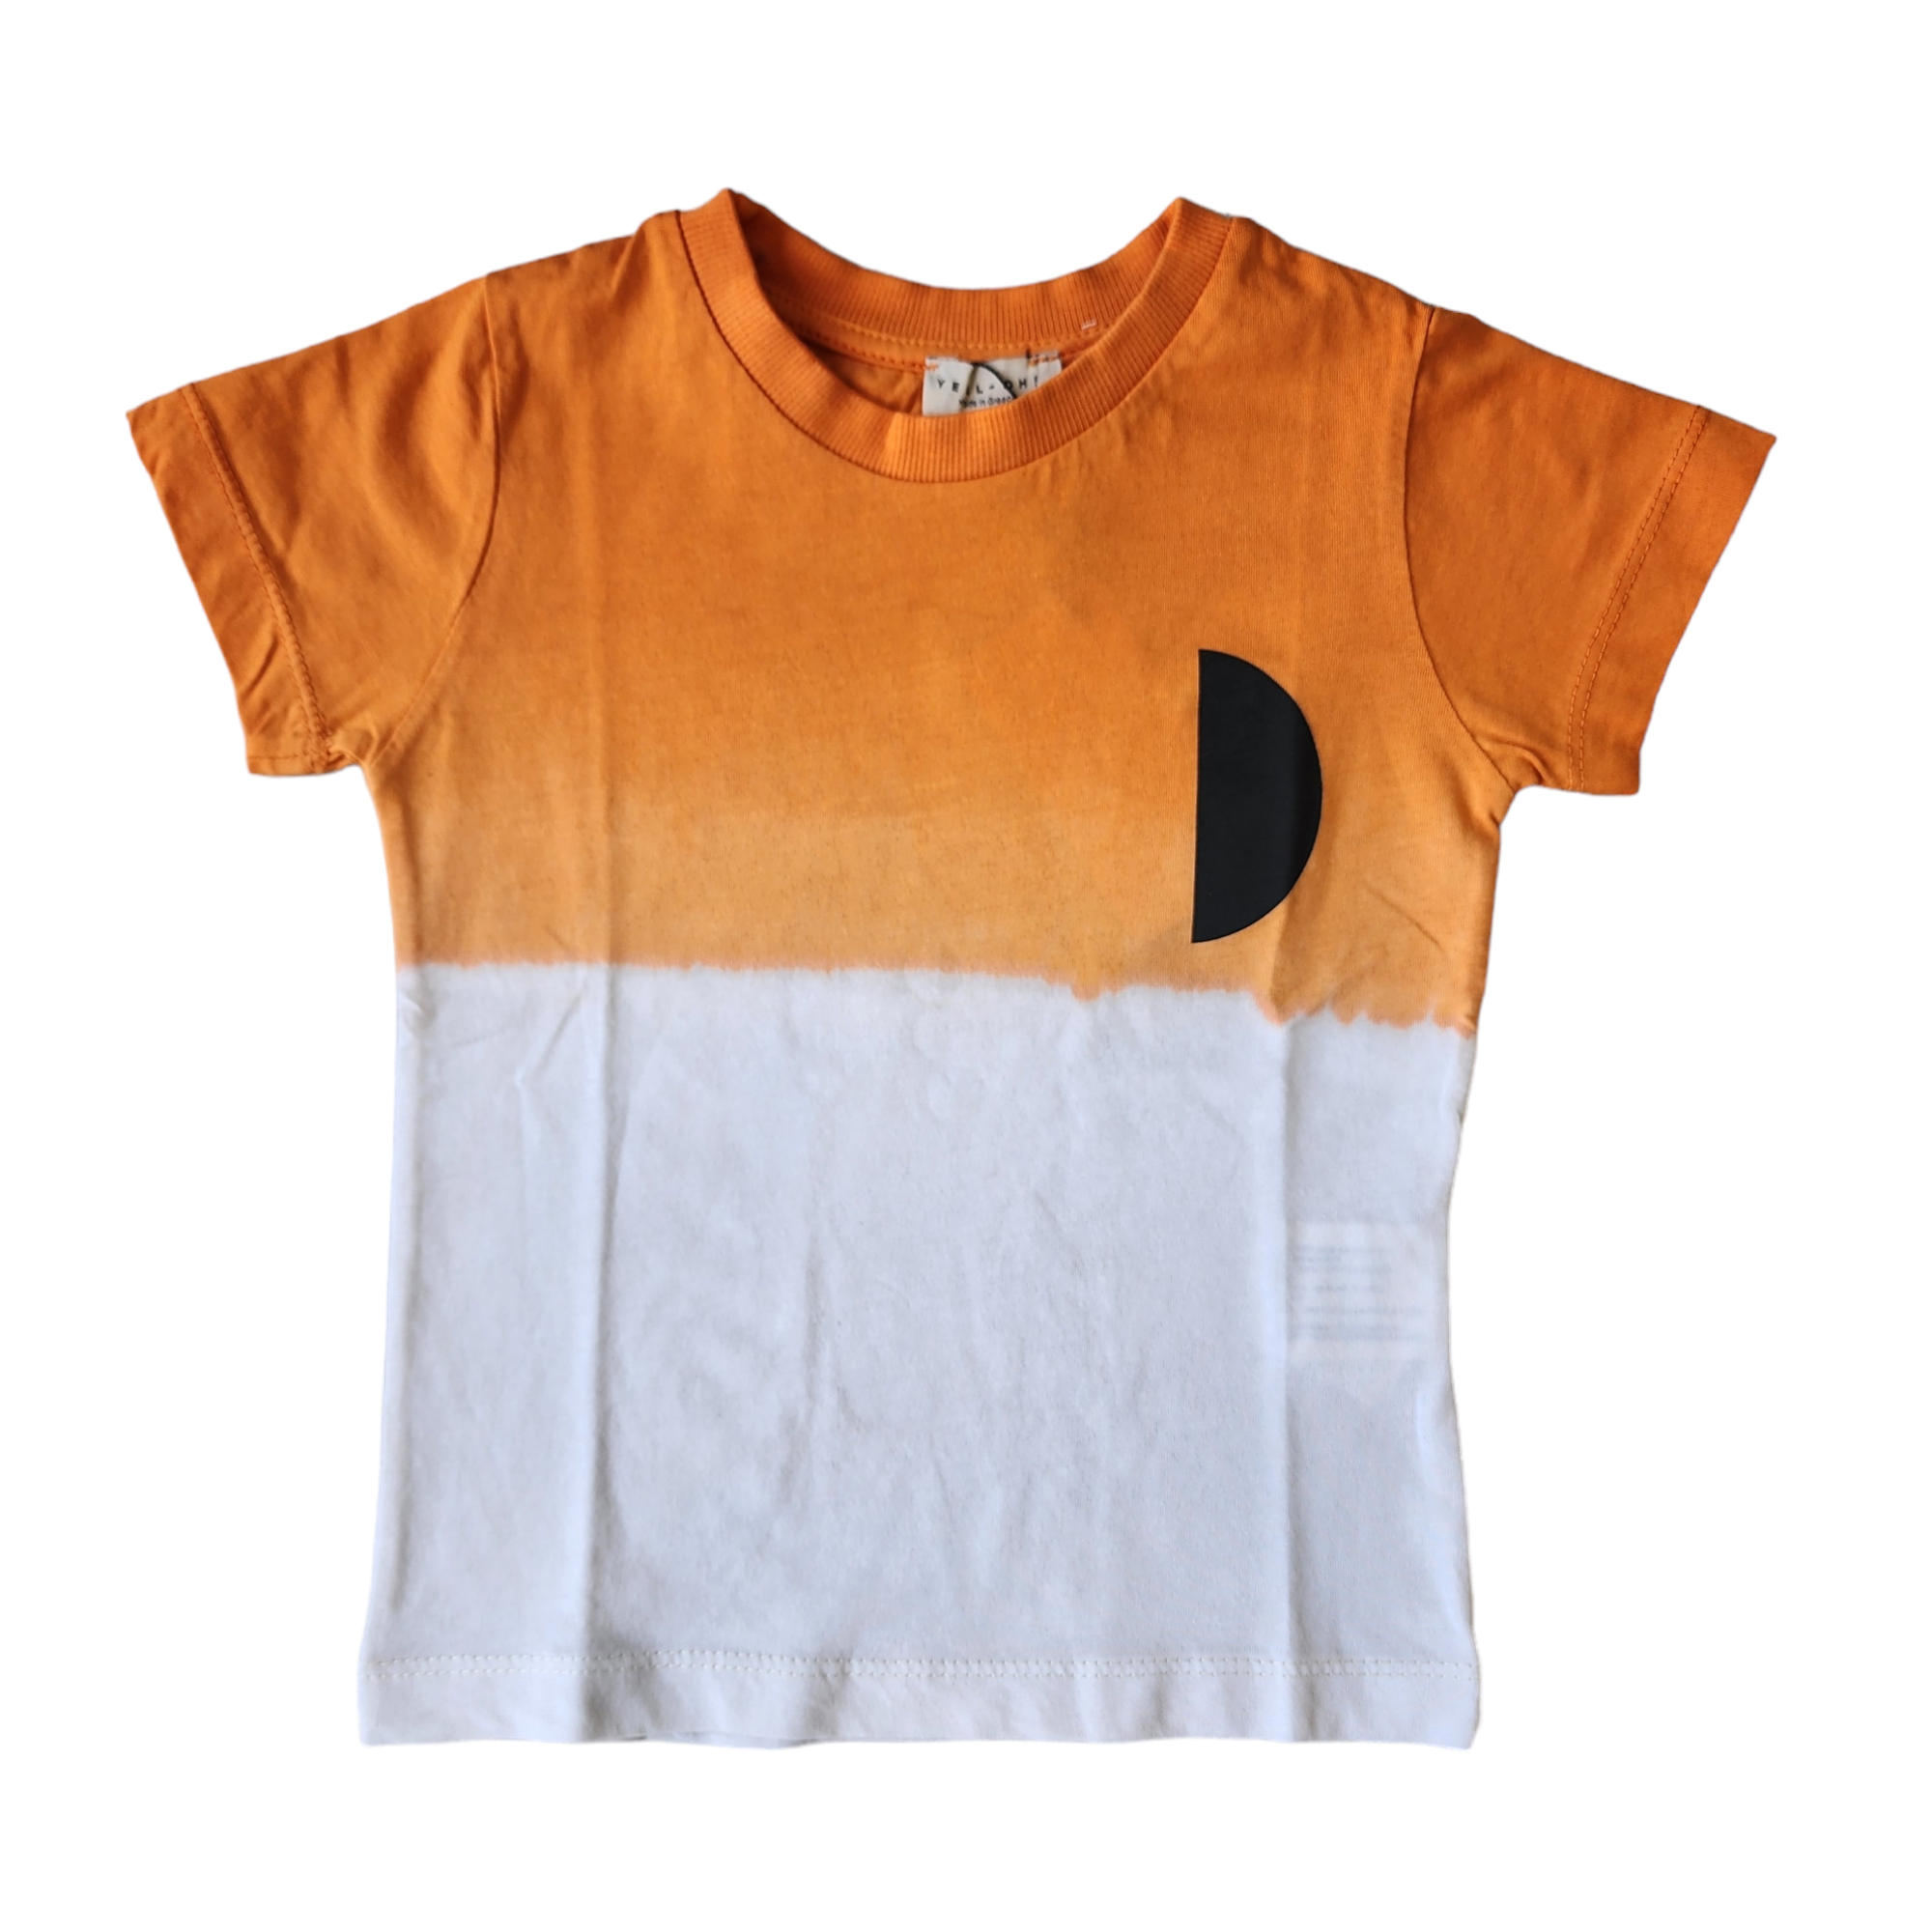 Yell-Oh Peach Ombre T-Shirt